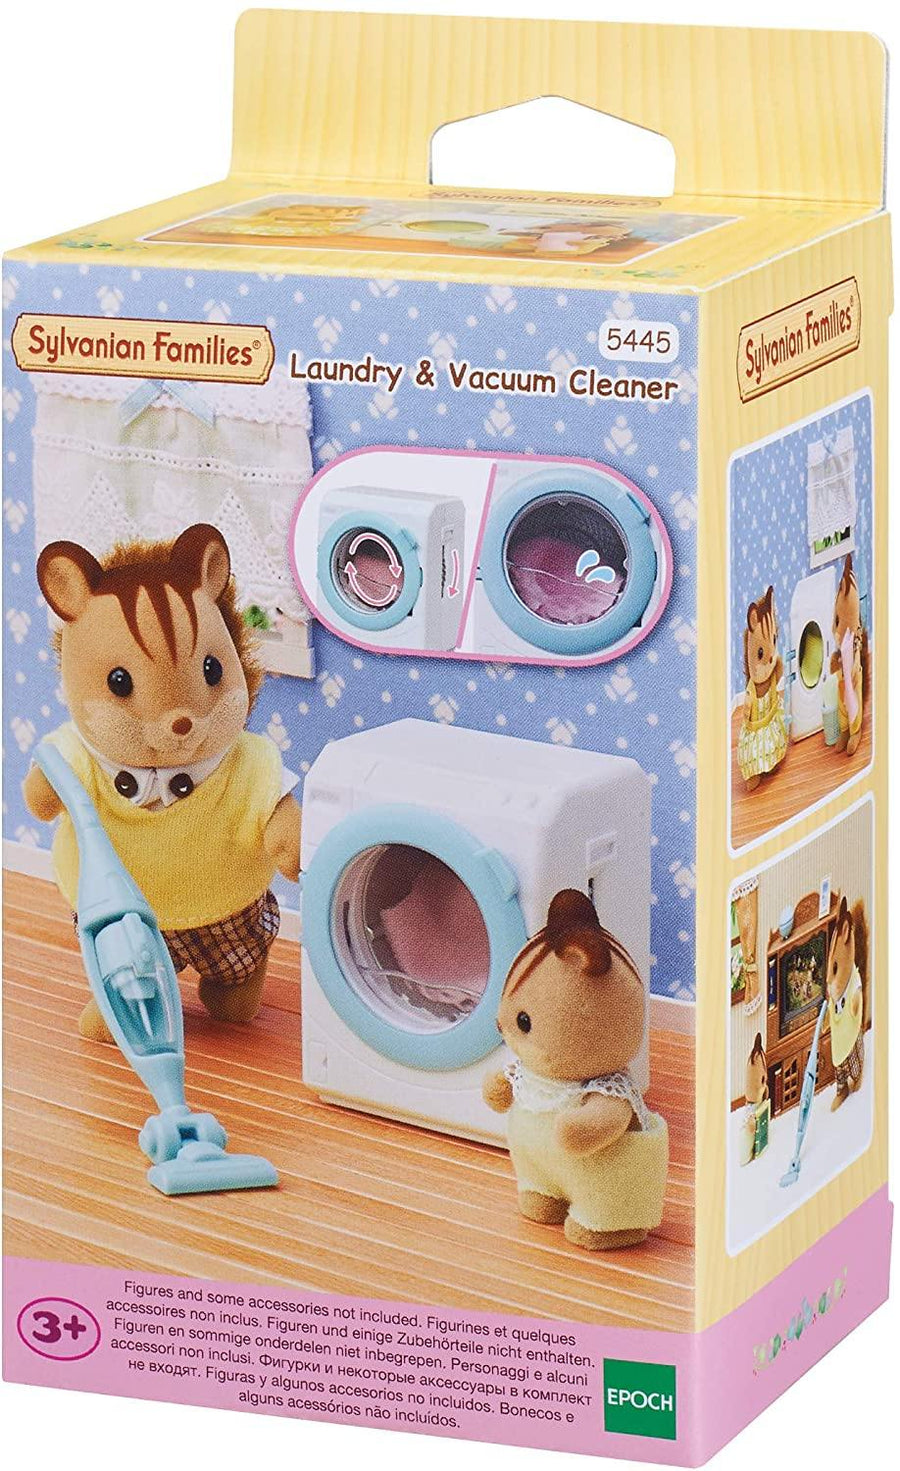 Sylvanian Families 5445 Laundry and Vacuum Cleaner - Yachew